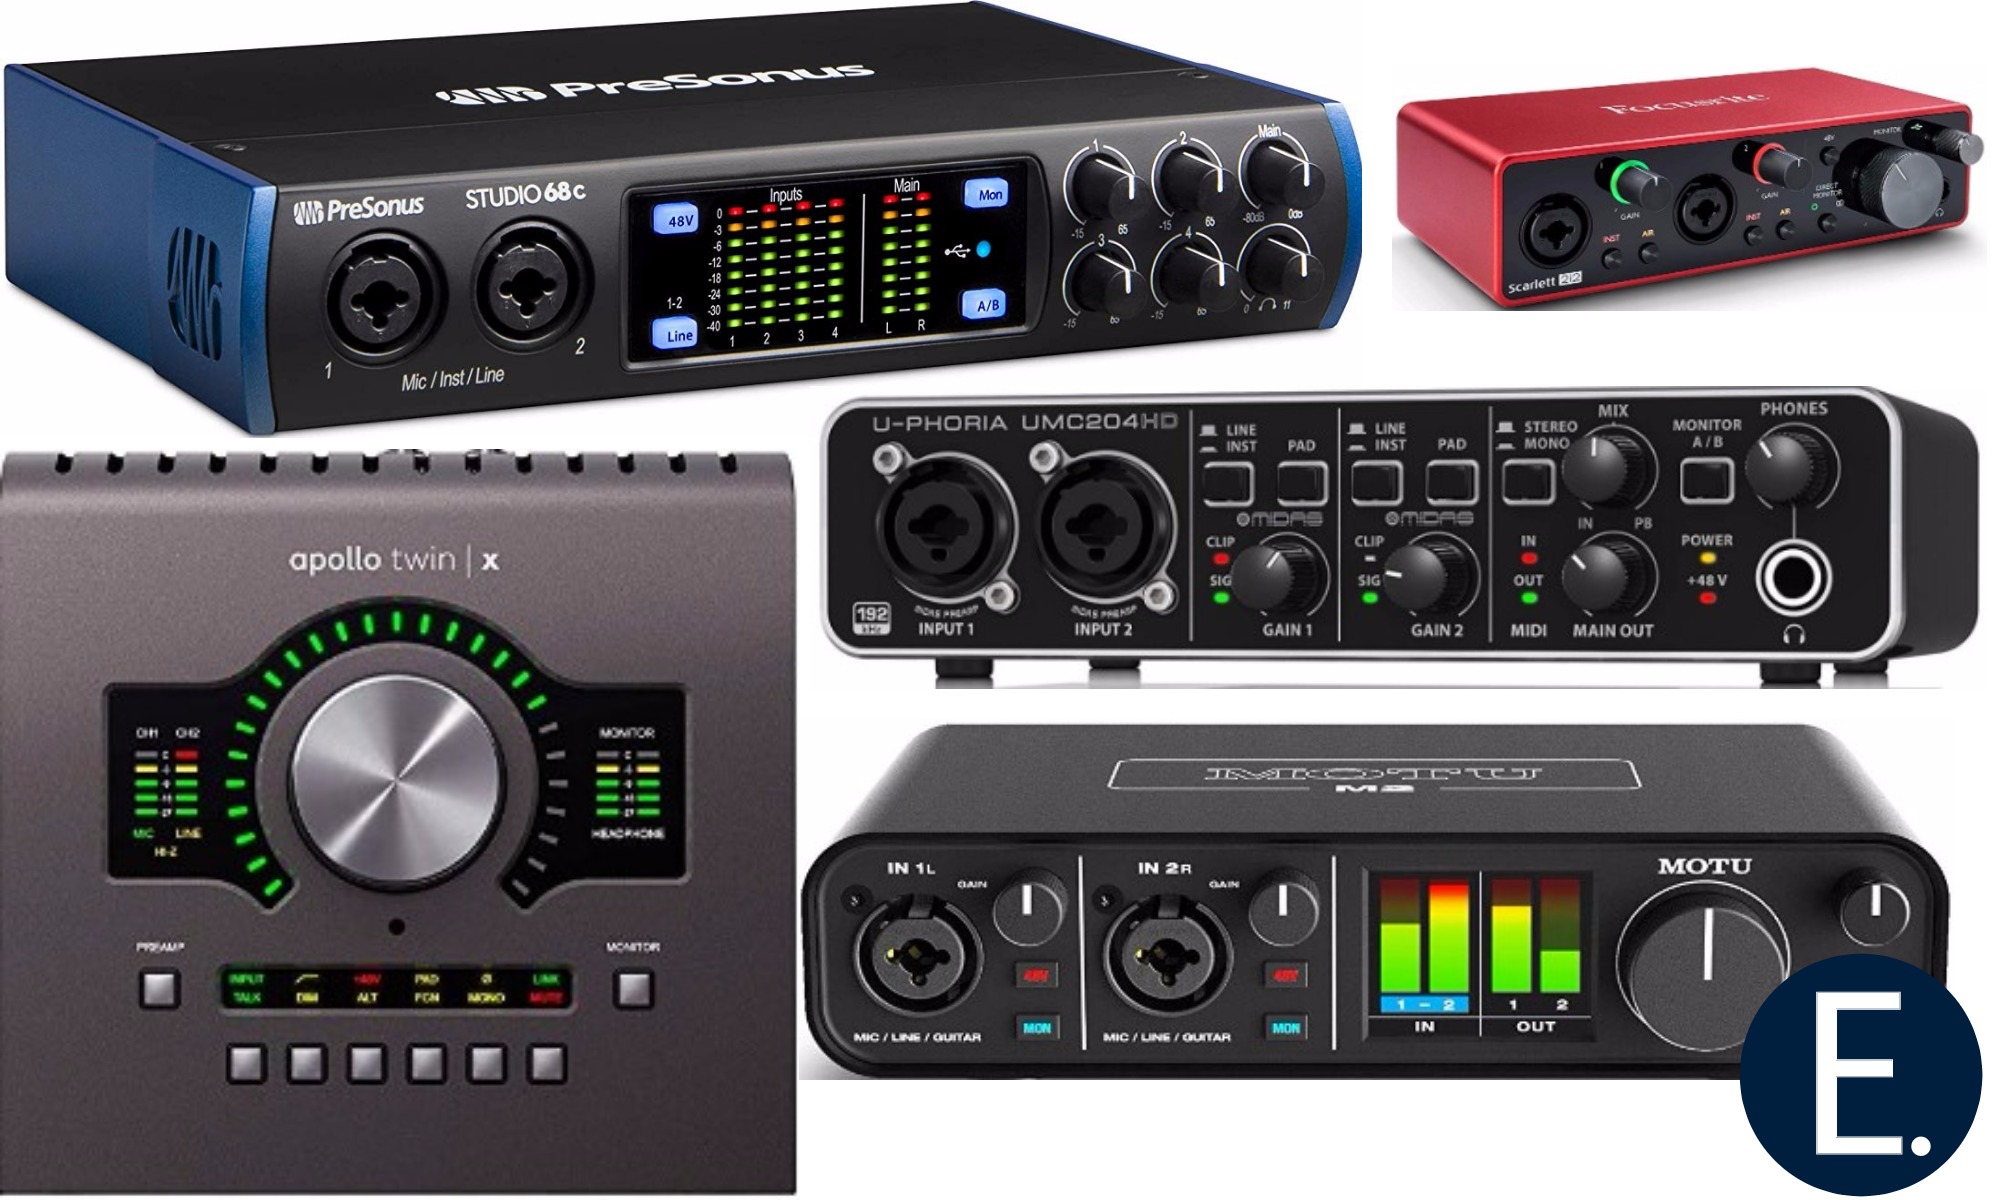 Exclusivemusicplus » The Best Audio Interfaces For Mixing & Mastering